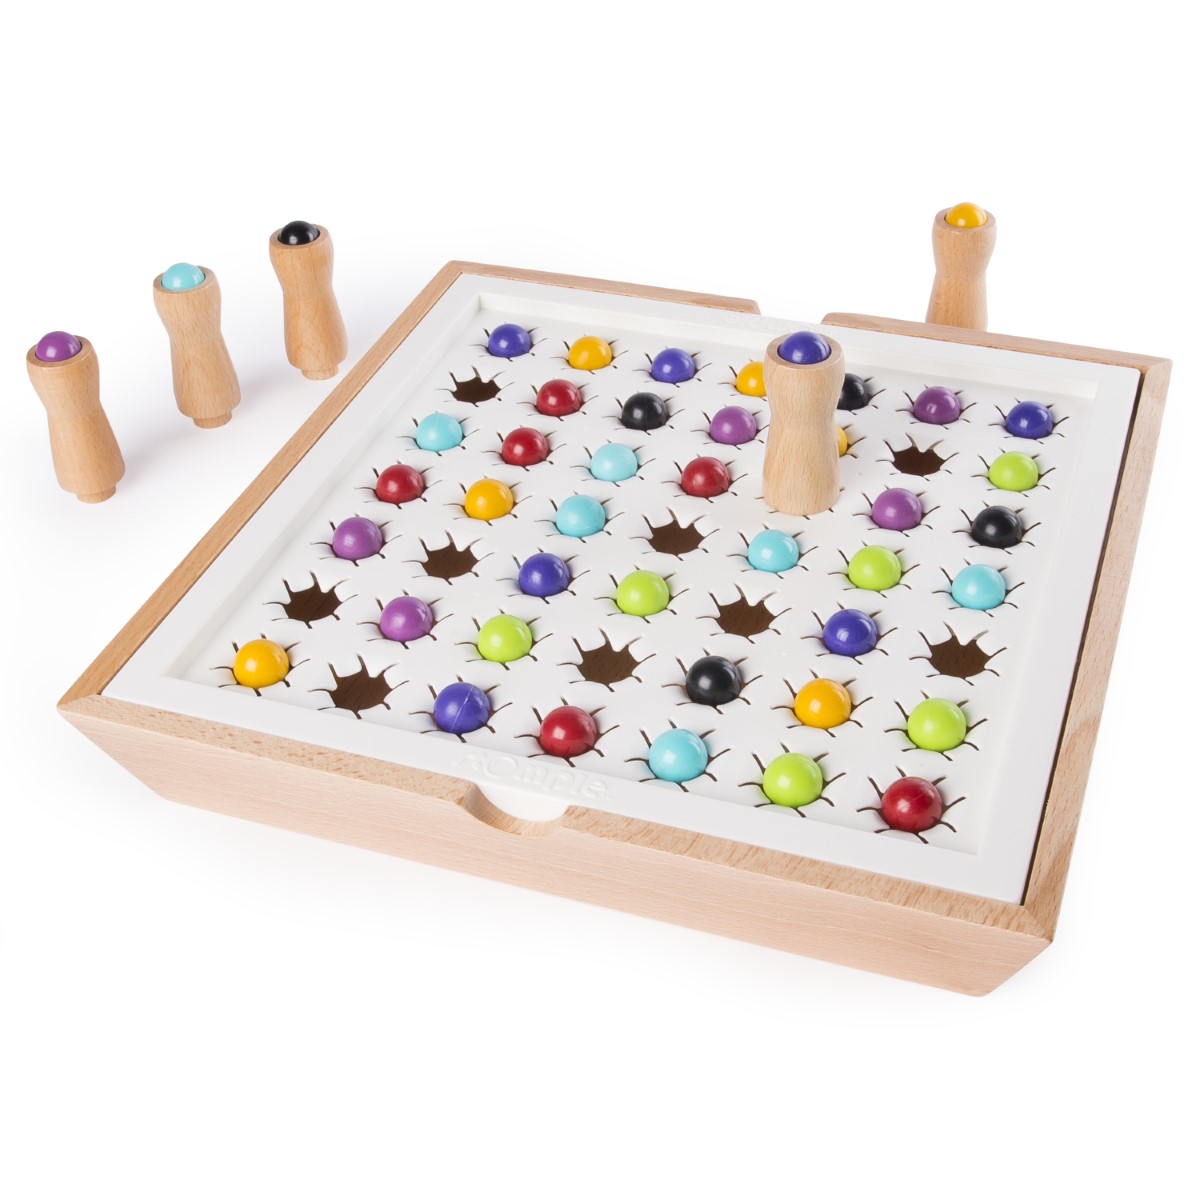 Stomple Marble Sorting Game